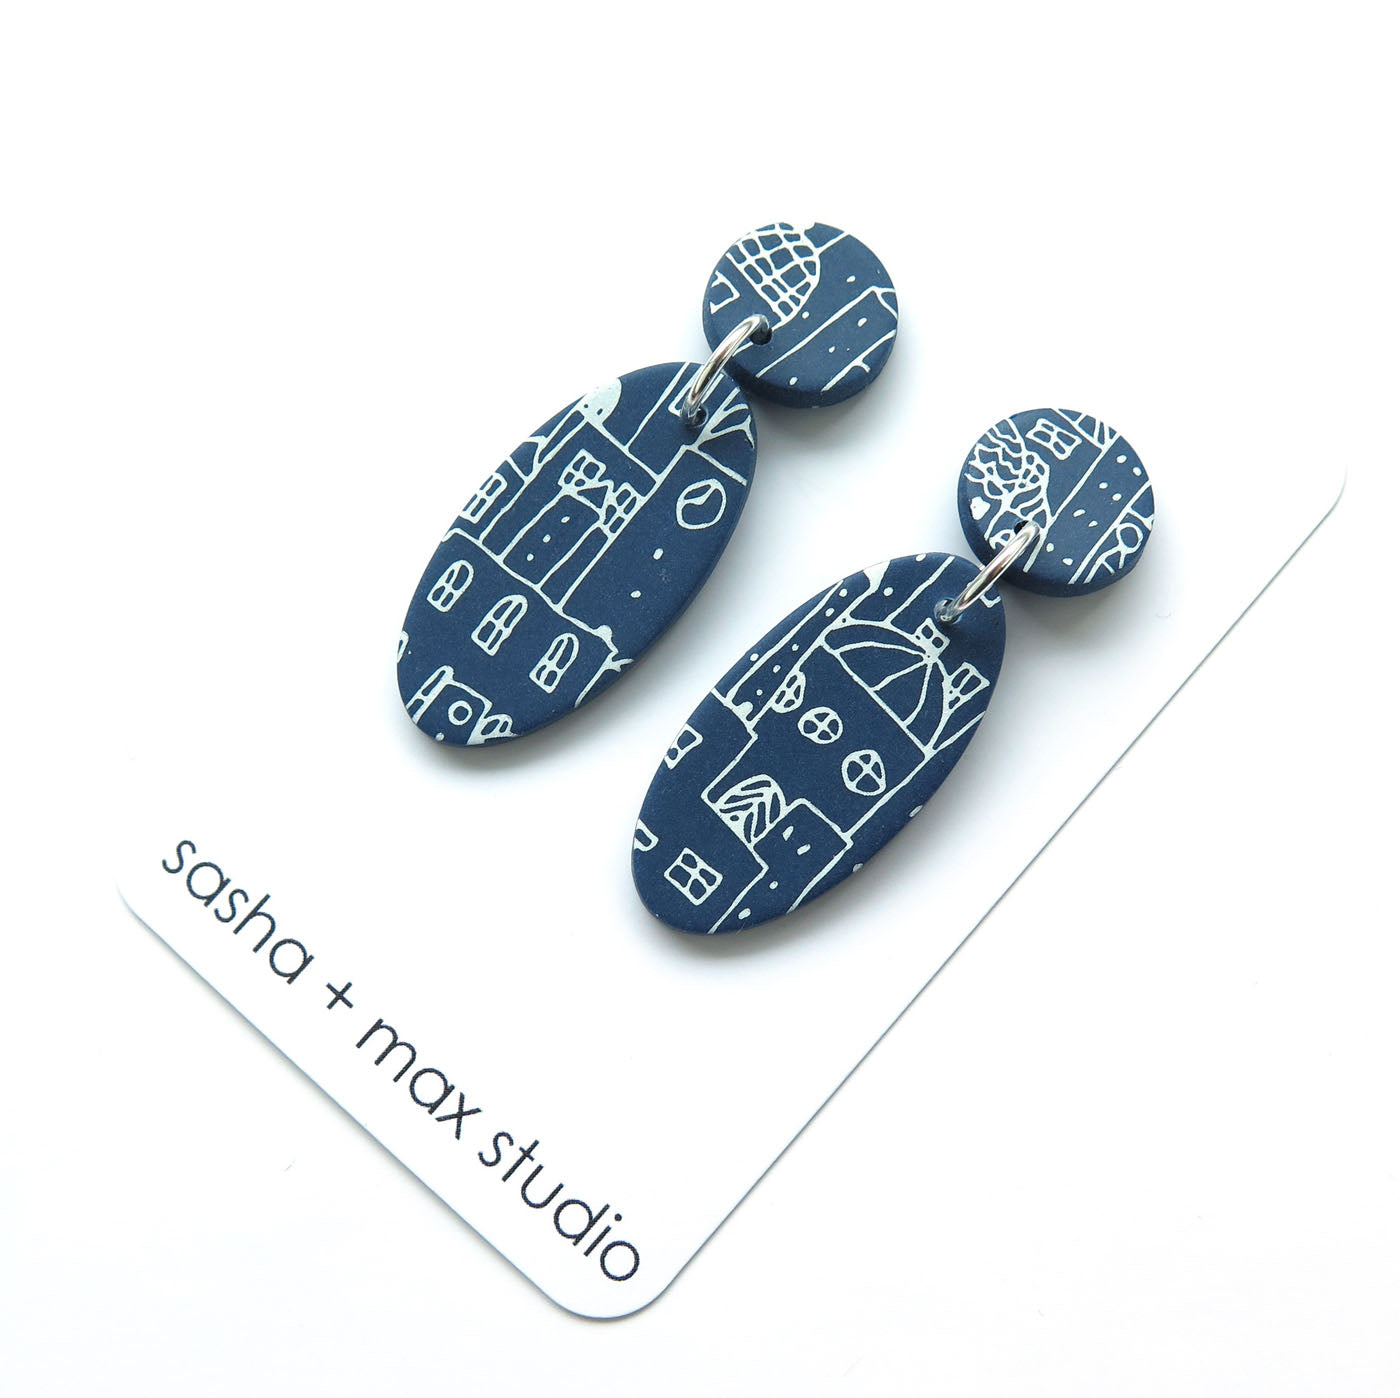 Blueprint Buildings Oval blue and white Polymer Clay earrings